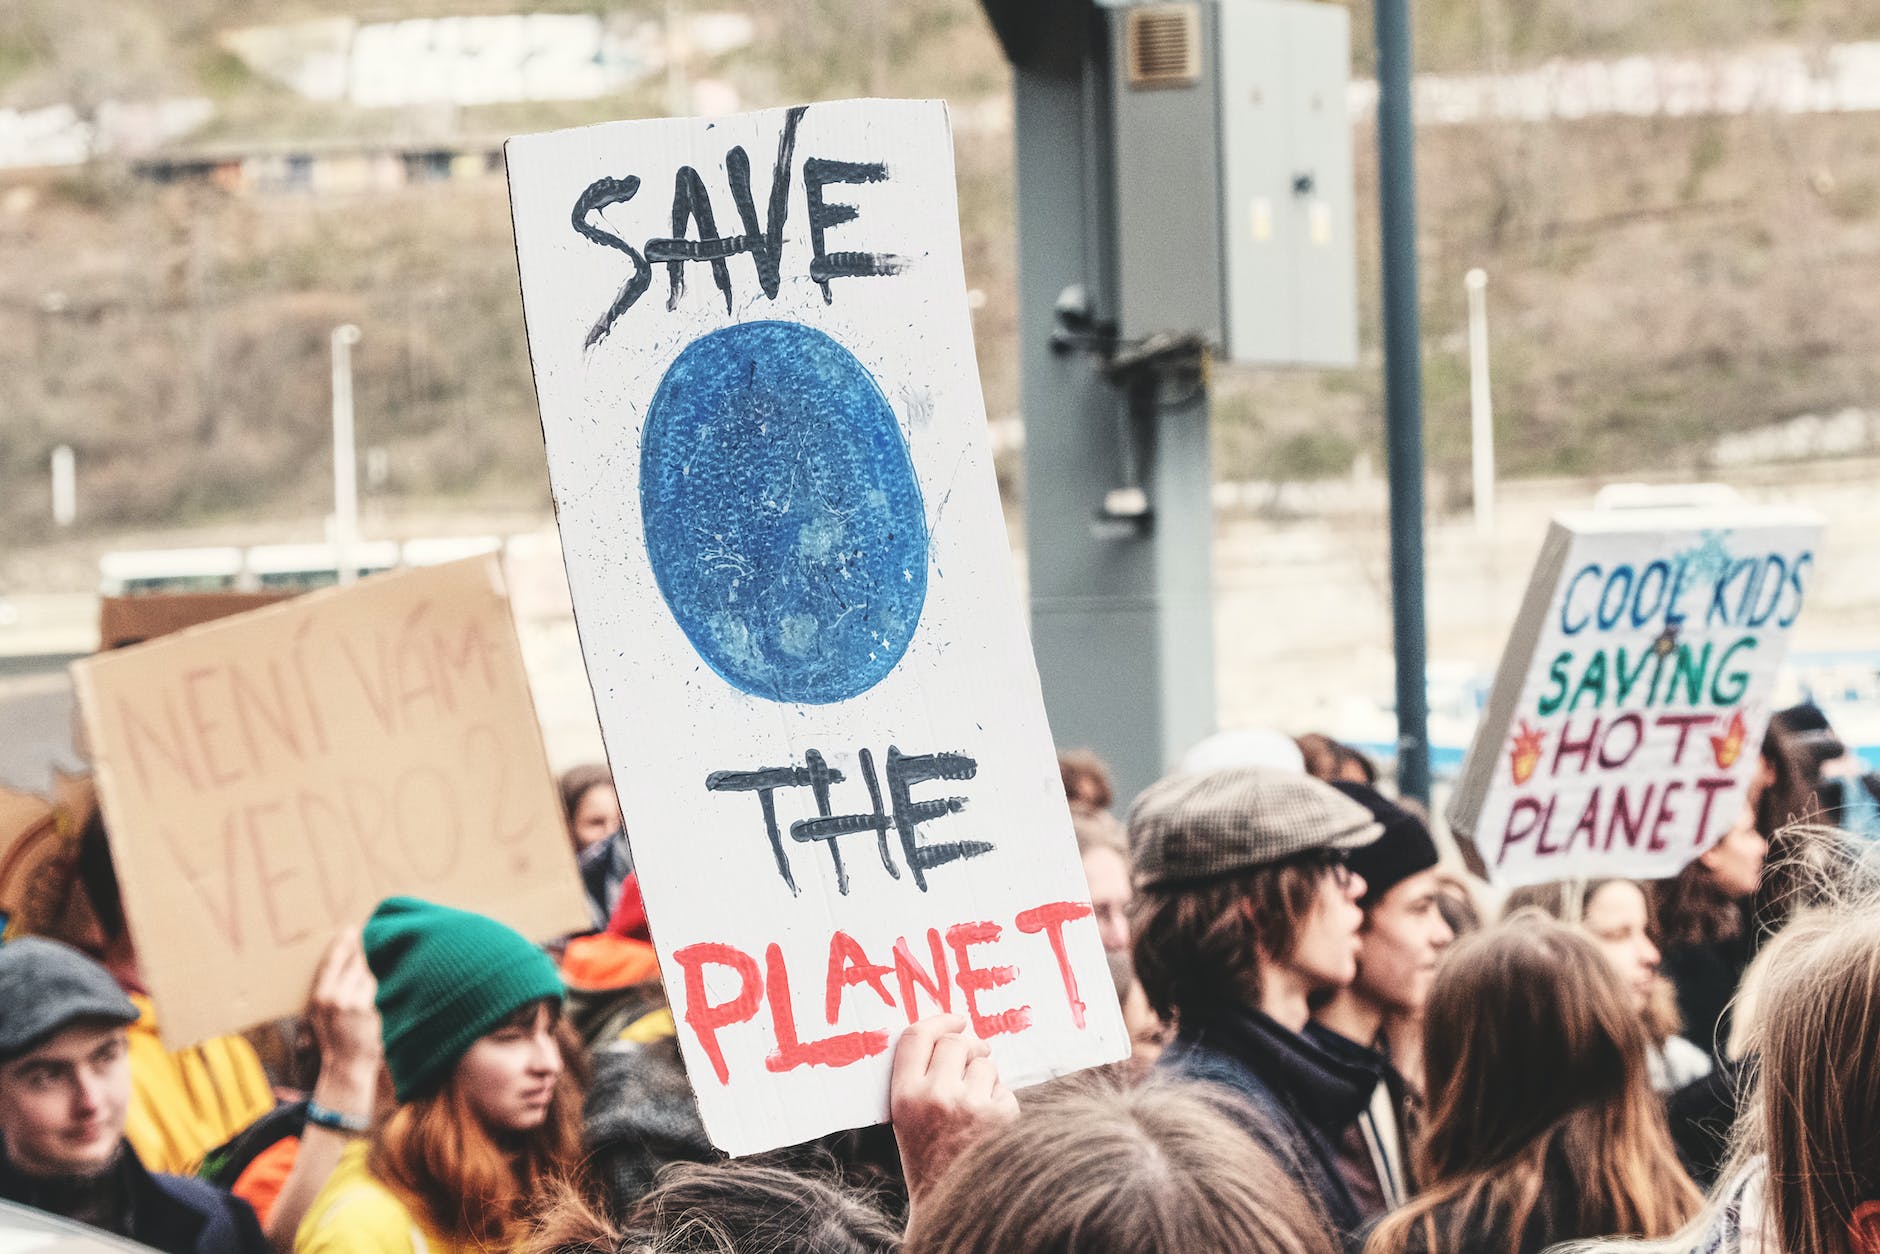 save the planet signage